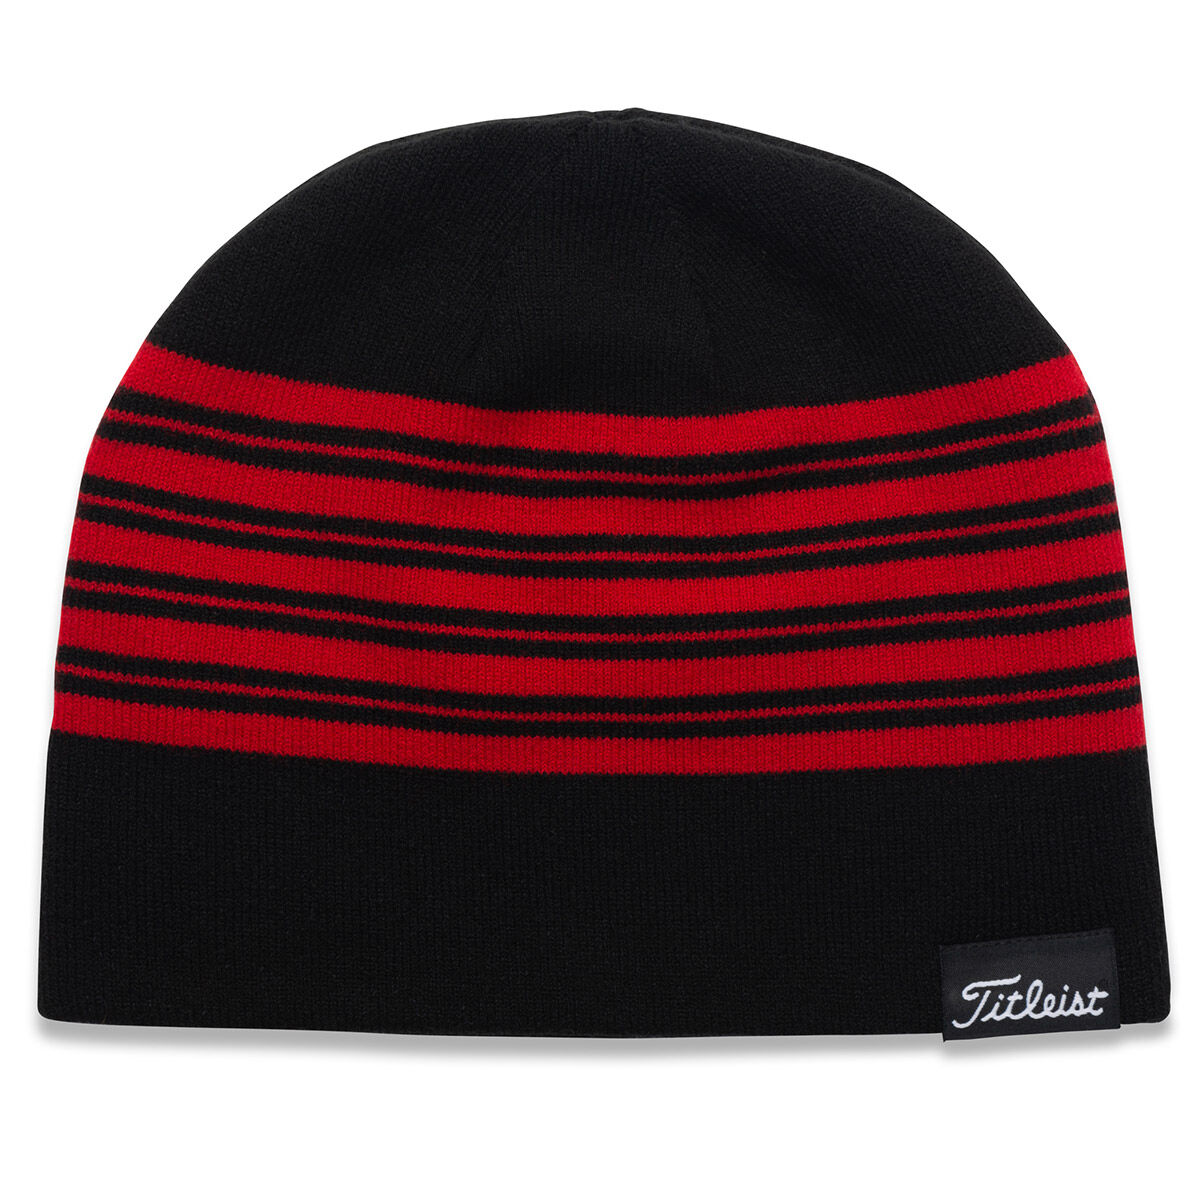 Titleist Black and Red Lifestyle Reversible Beanie Hat, One Size | American Golf